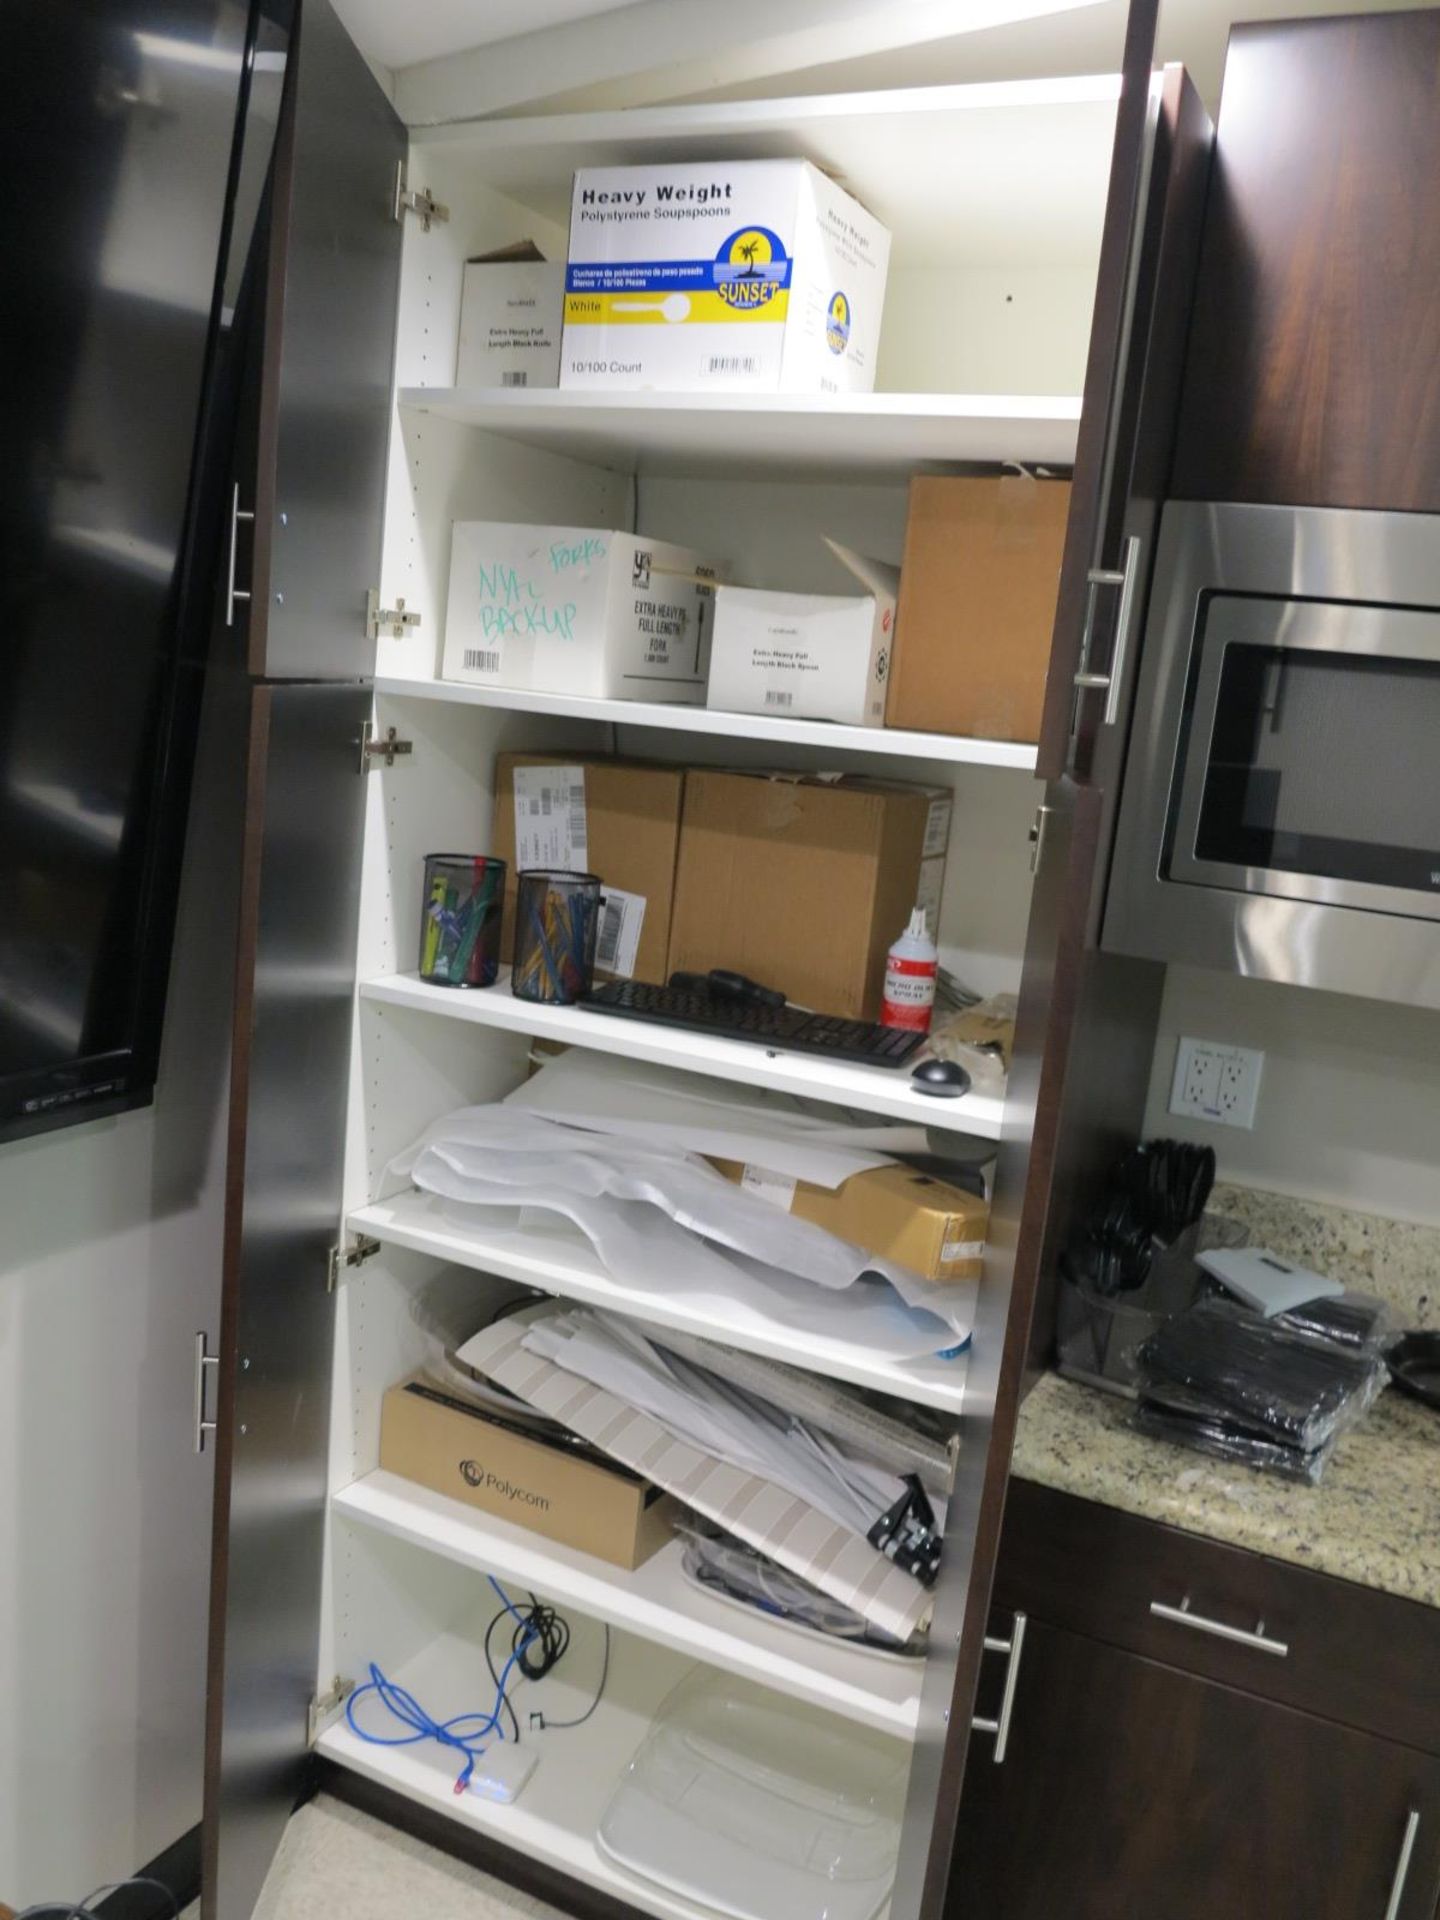 LOT - CONTENTS OF CABINETS AND DRAWERS (BREAK ROOM SUPPLIES)